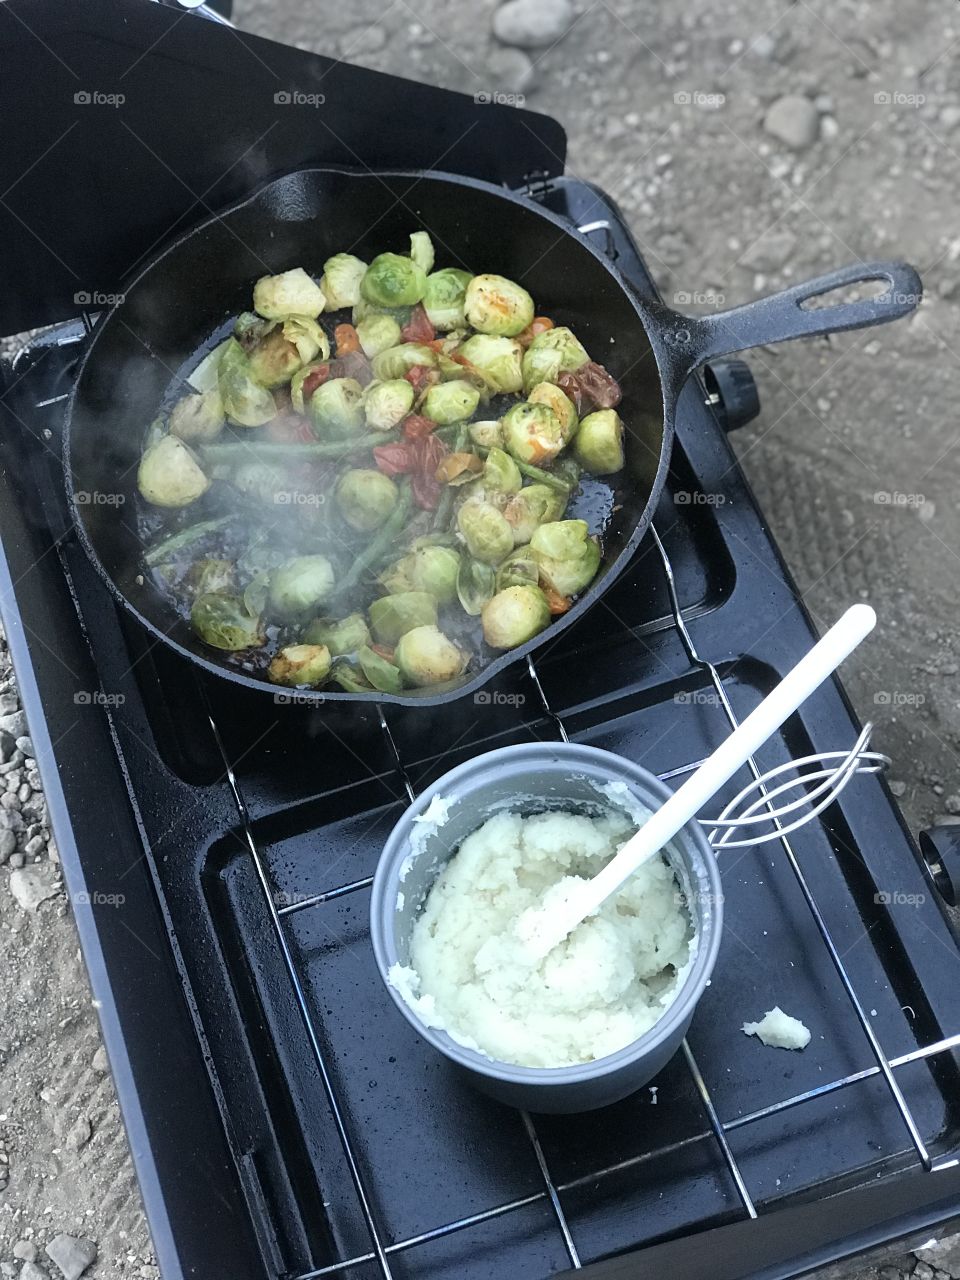 A good ol’ camp dinner. Awaiting a colorful array of sautéed veggies and mashed potatoes to cook to perfection. 